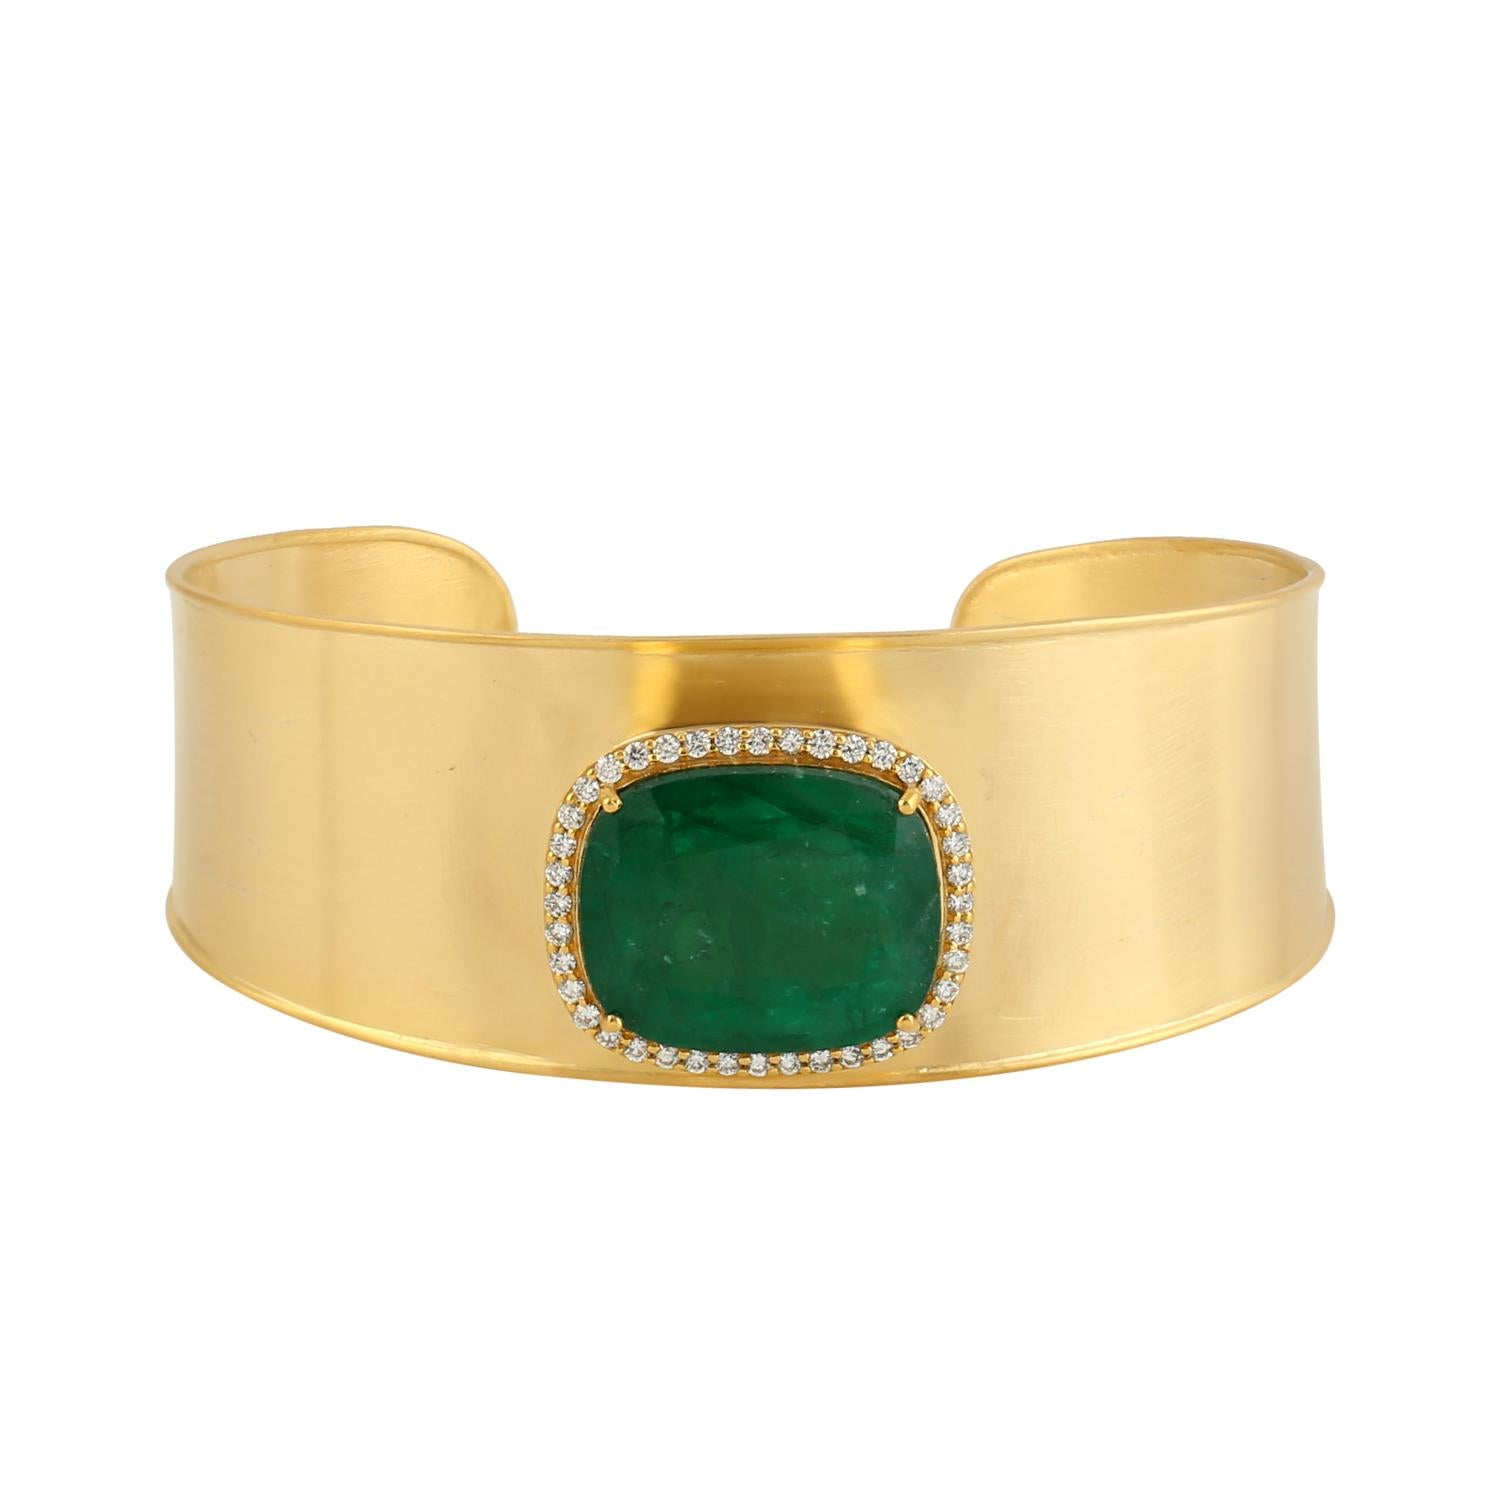 A stunning statement cuff handmade in 14K gold. It is set in 20.22 carats emerald and .47 carats of sparkling diamonds.

FOLLOW  MEGHNA JEWELS storefront to view the latest collection & exclusive pieces.  Meghna Jewels is proudly rated as a Top